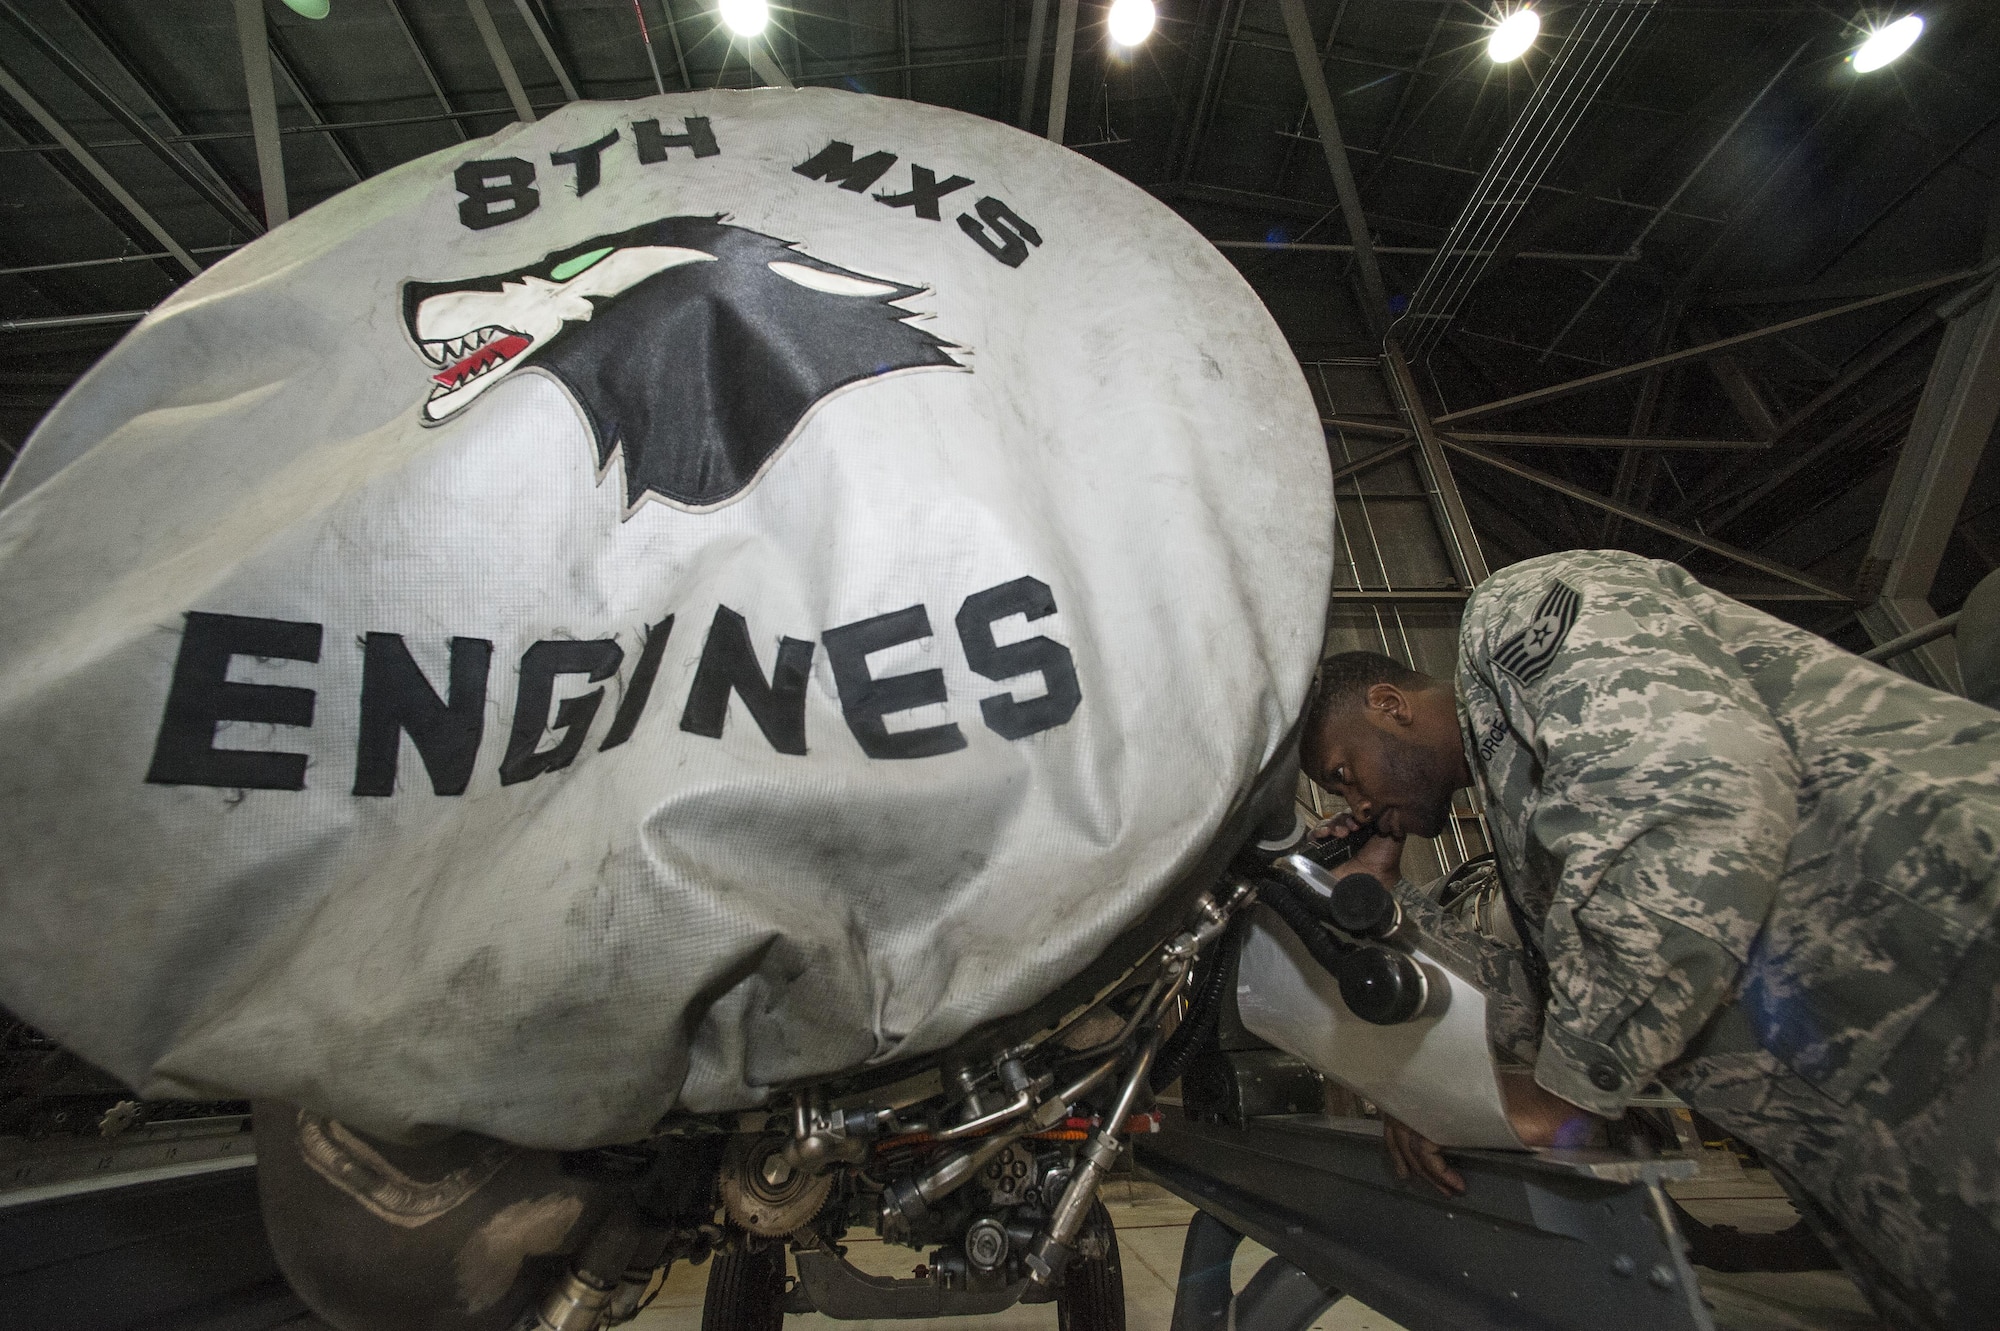 Tech. Sgt. Rowland Thagard, 8th Maintenance Squadron assistant propulsion section chief, performs an inspection on the outer components of an F-16 Fighting Falcon engine at Kunsan Air Base, Republic of Korea, Jan. 7, 2016. The propulsion section controls and maintains all of the inbound and outbound F-16 Fighting Falcon engines on base. (U.S. Air Force photo by Staff Sgt. Nick Wilson/Released)